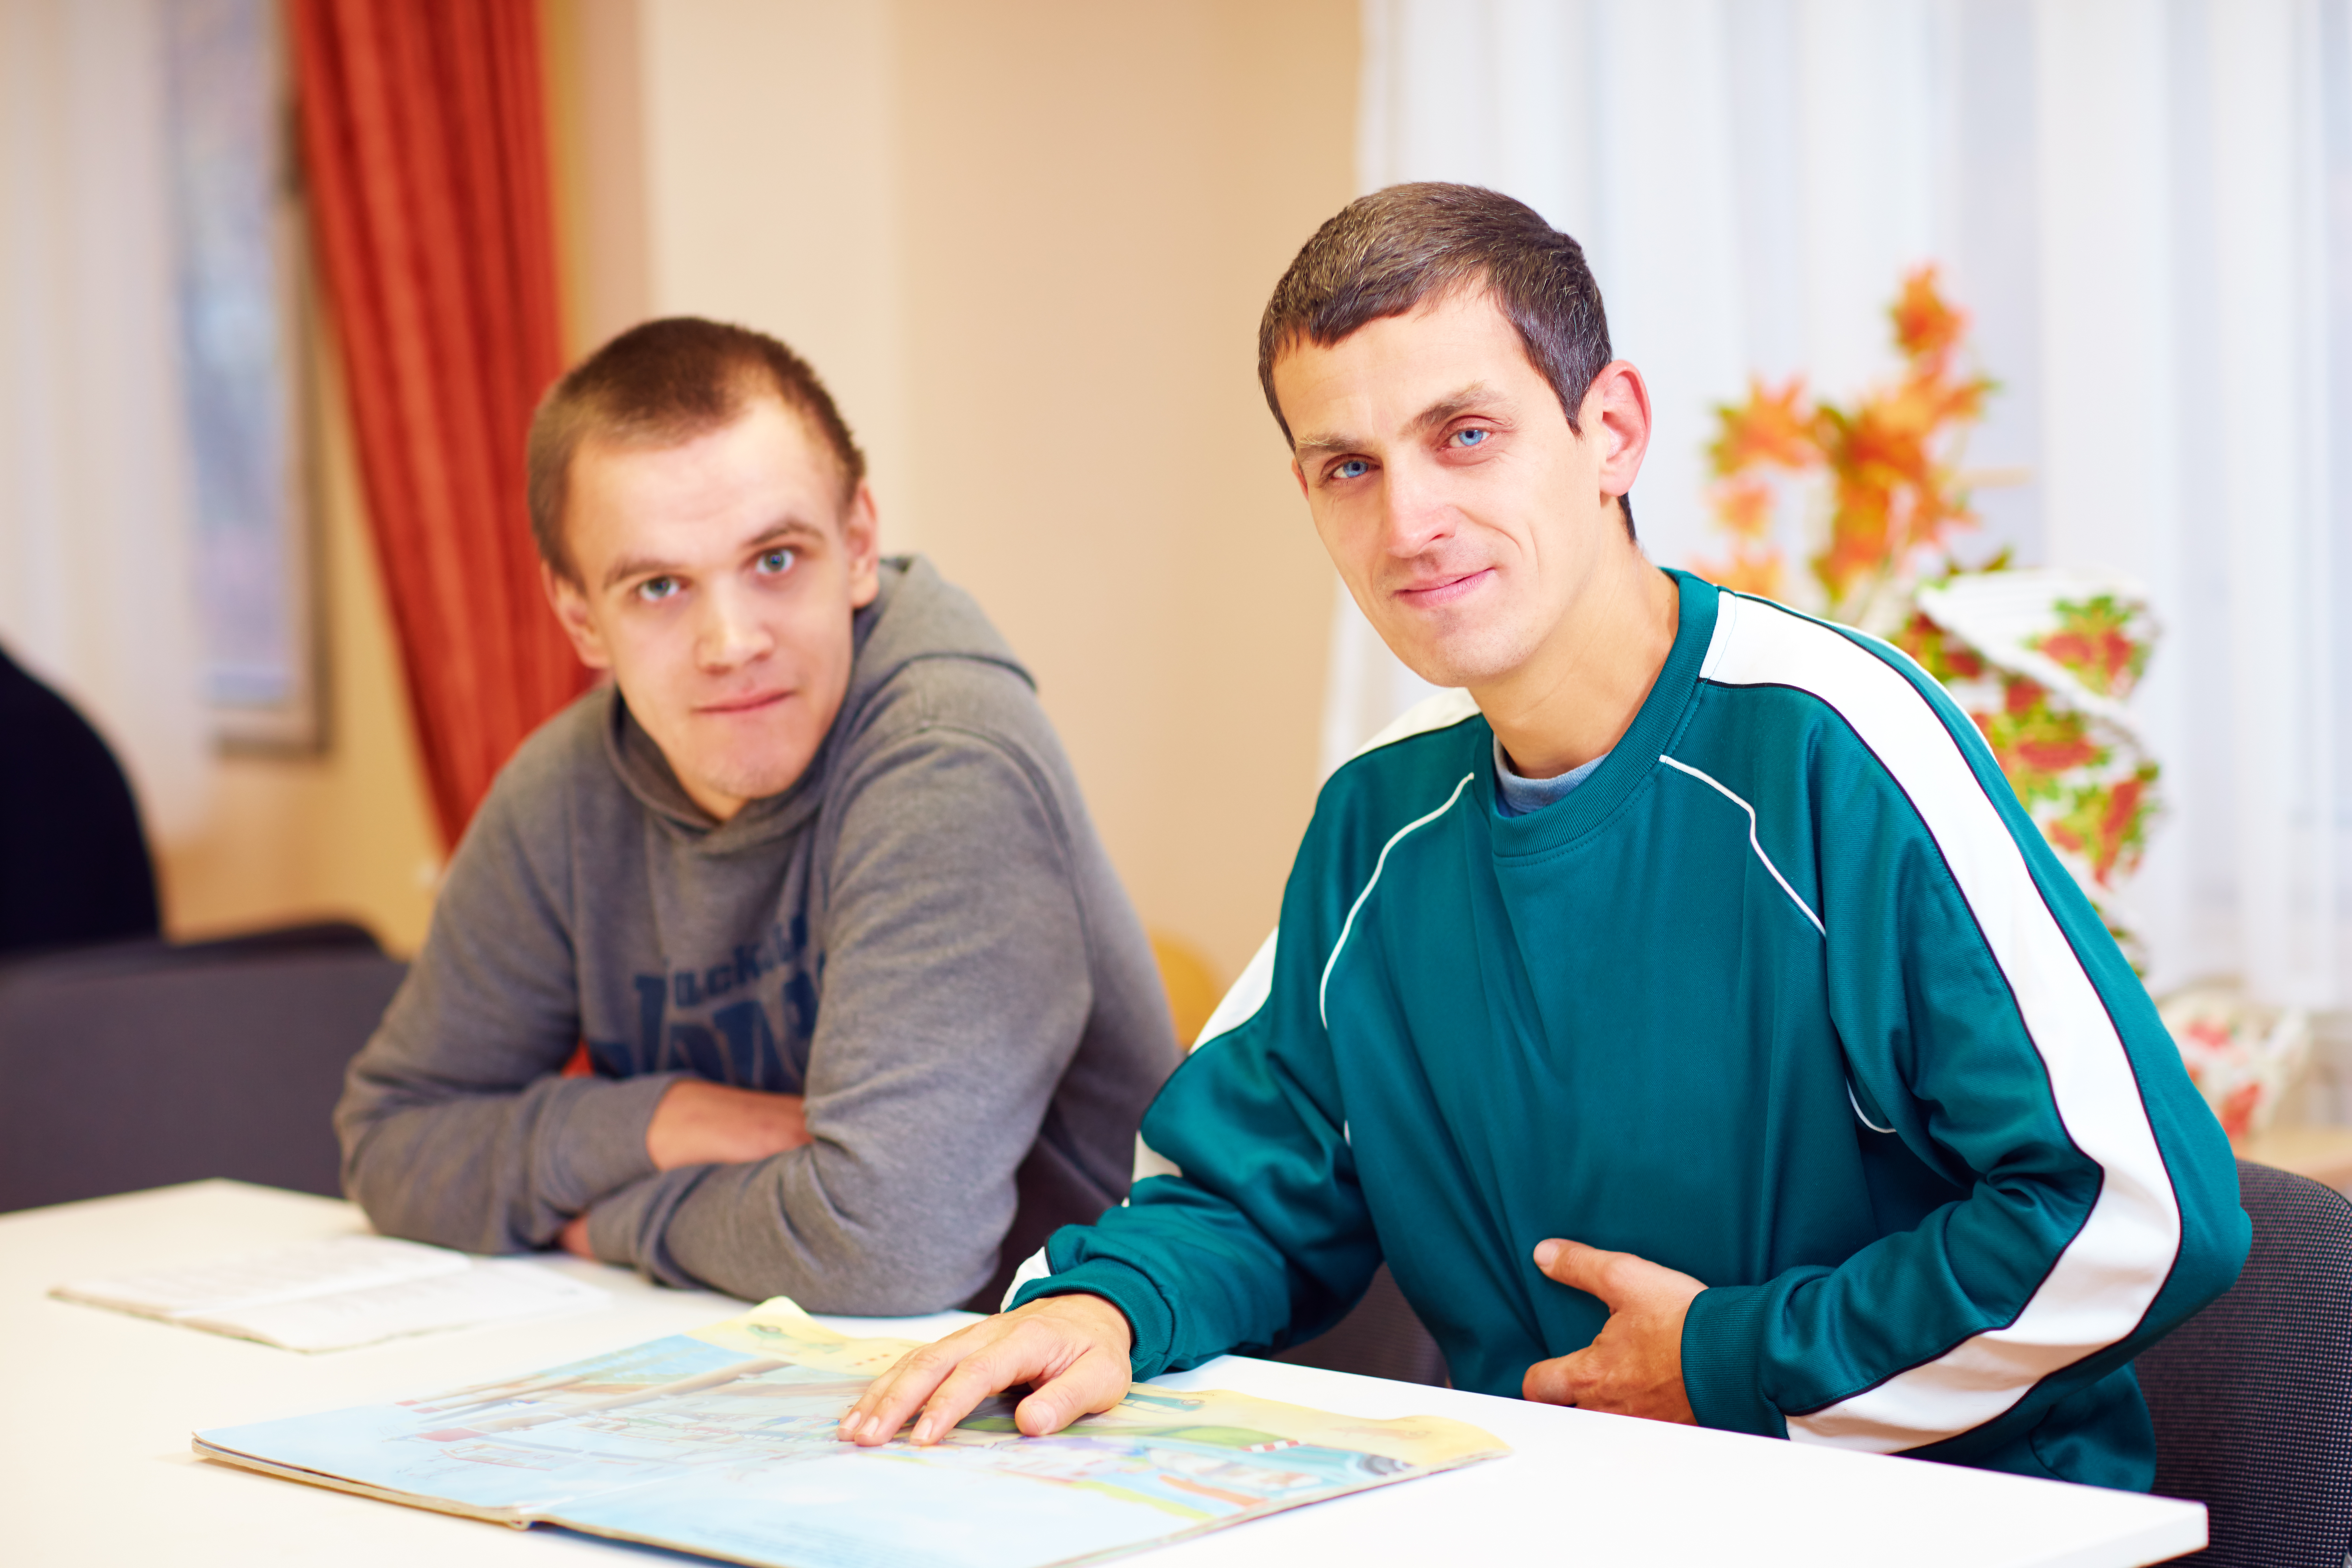 Cheerful adult men sitting at a desk going over paperwork looking directly at camera